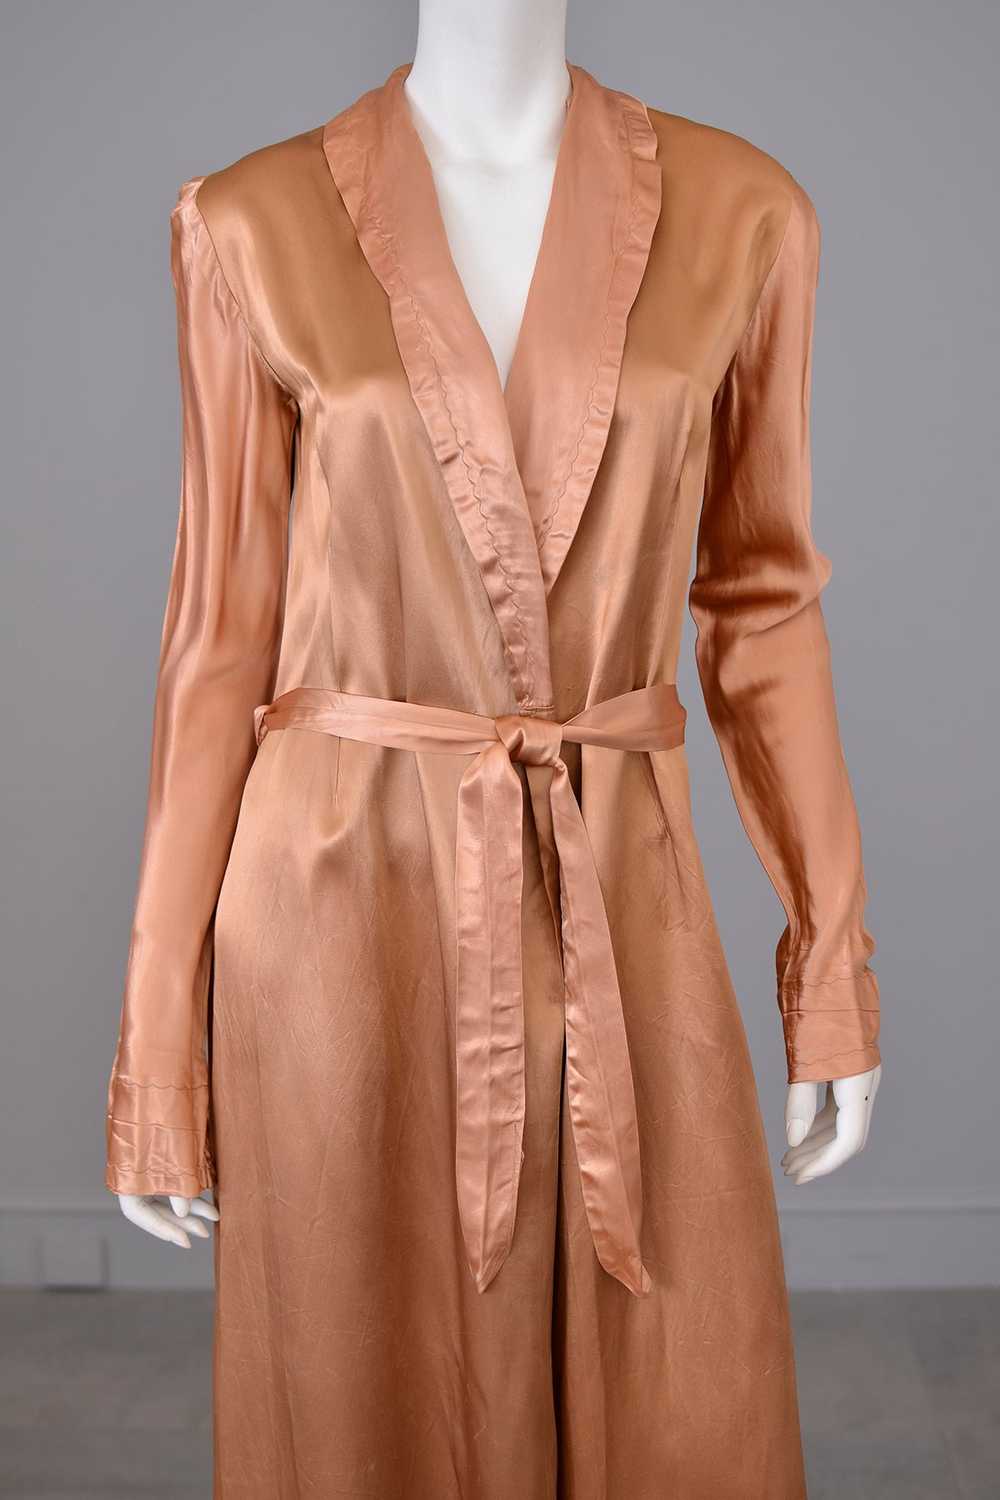 1940s Copper Satin Lounging Robe - image 5